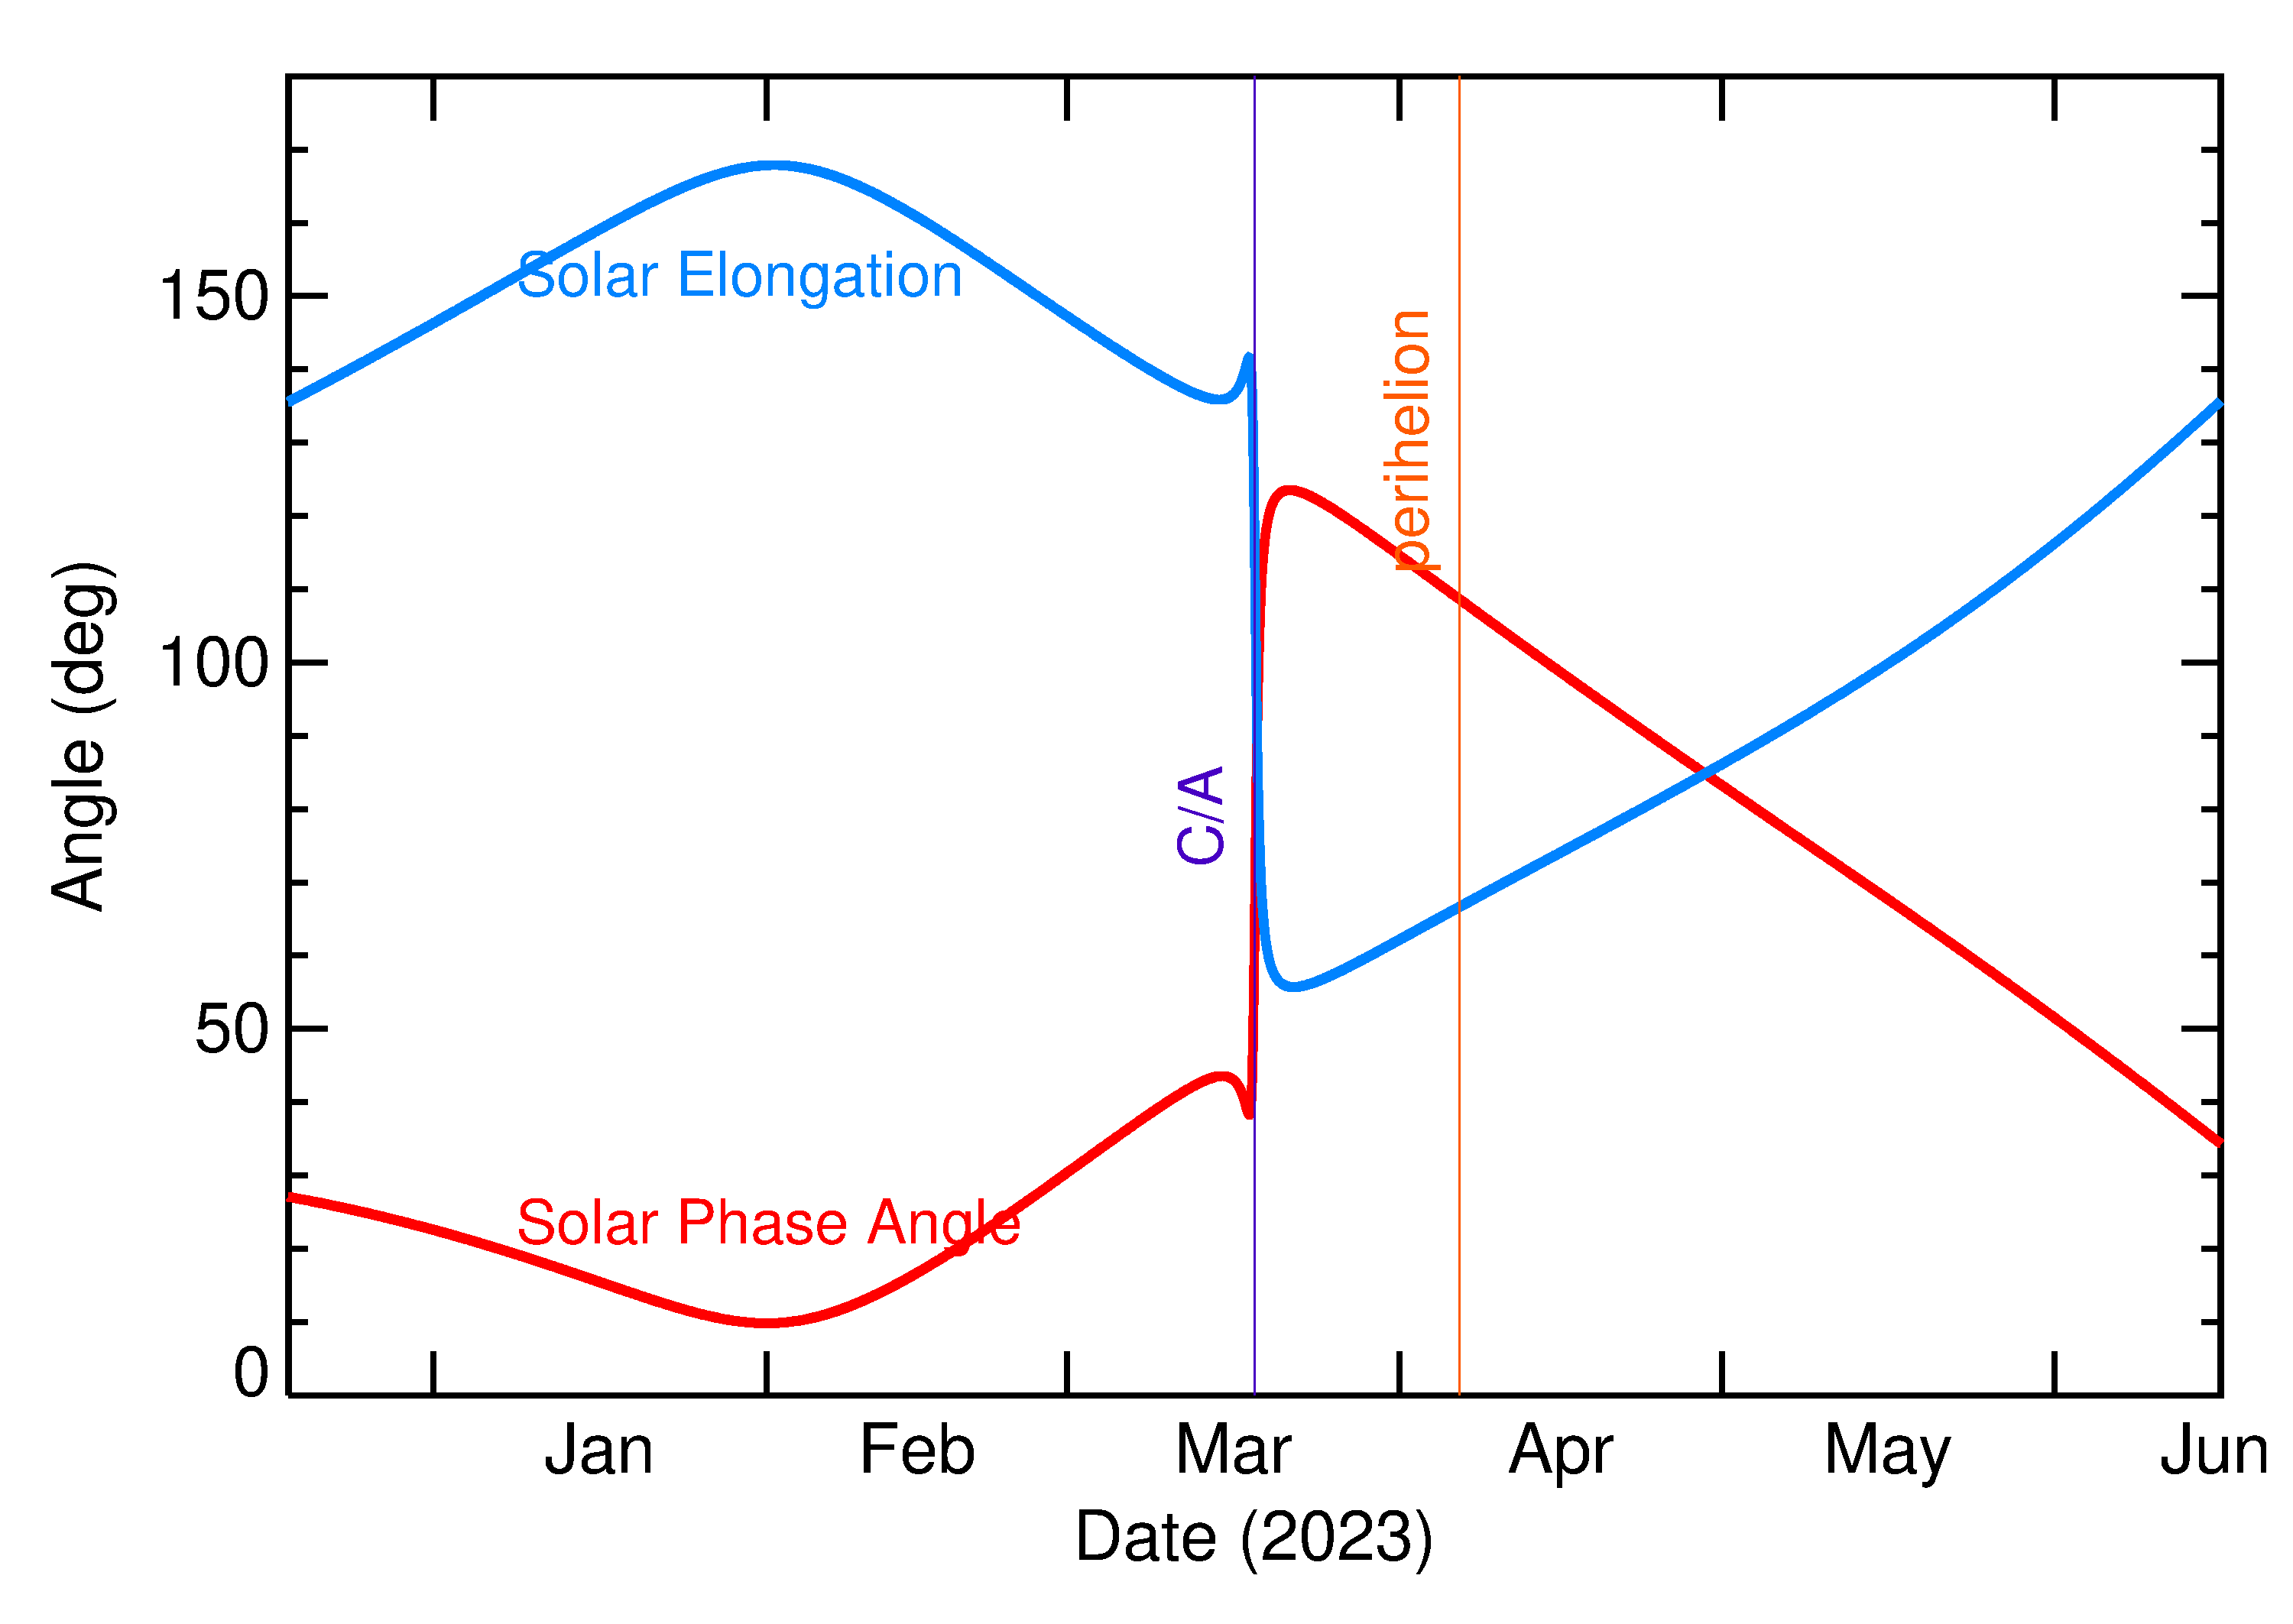 Solar Elongation and Solar Phase Angle of 2023 EY in the months around closest approach